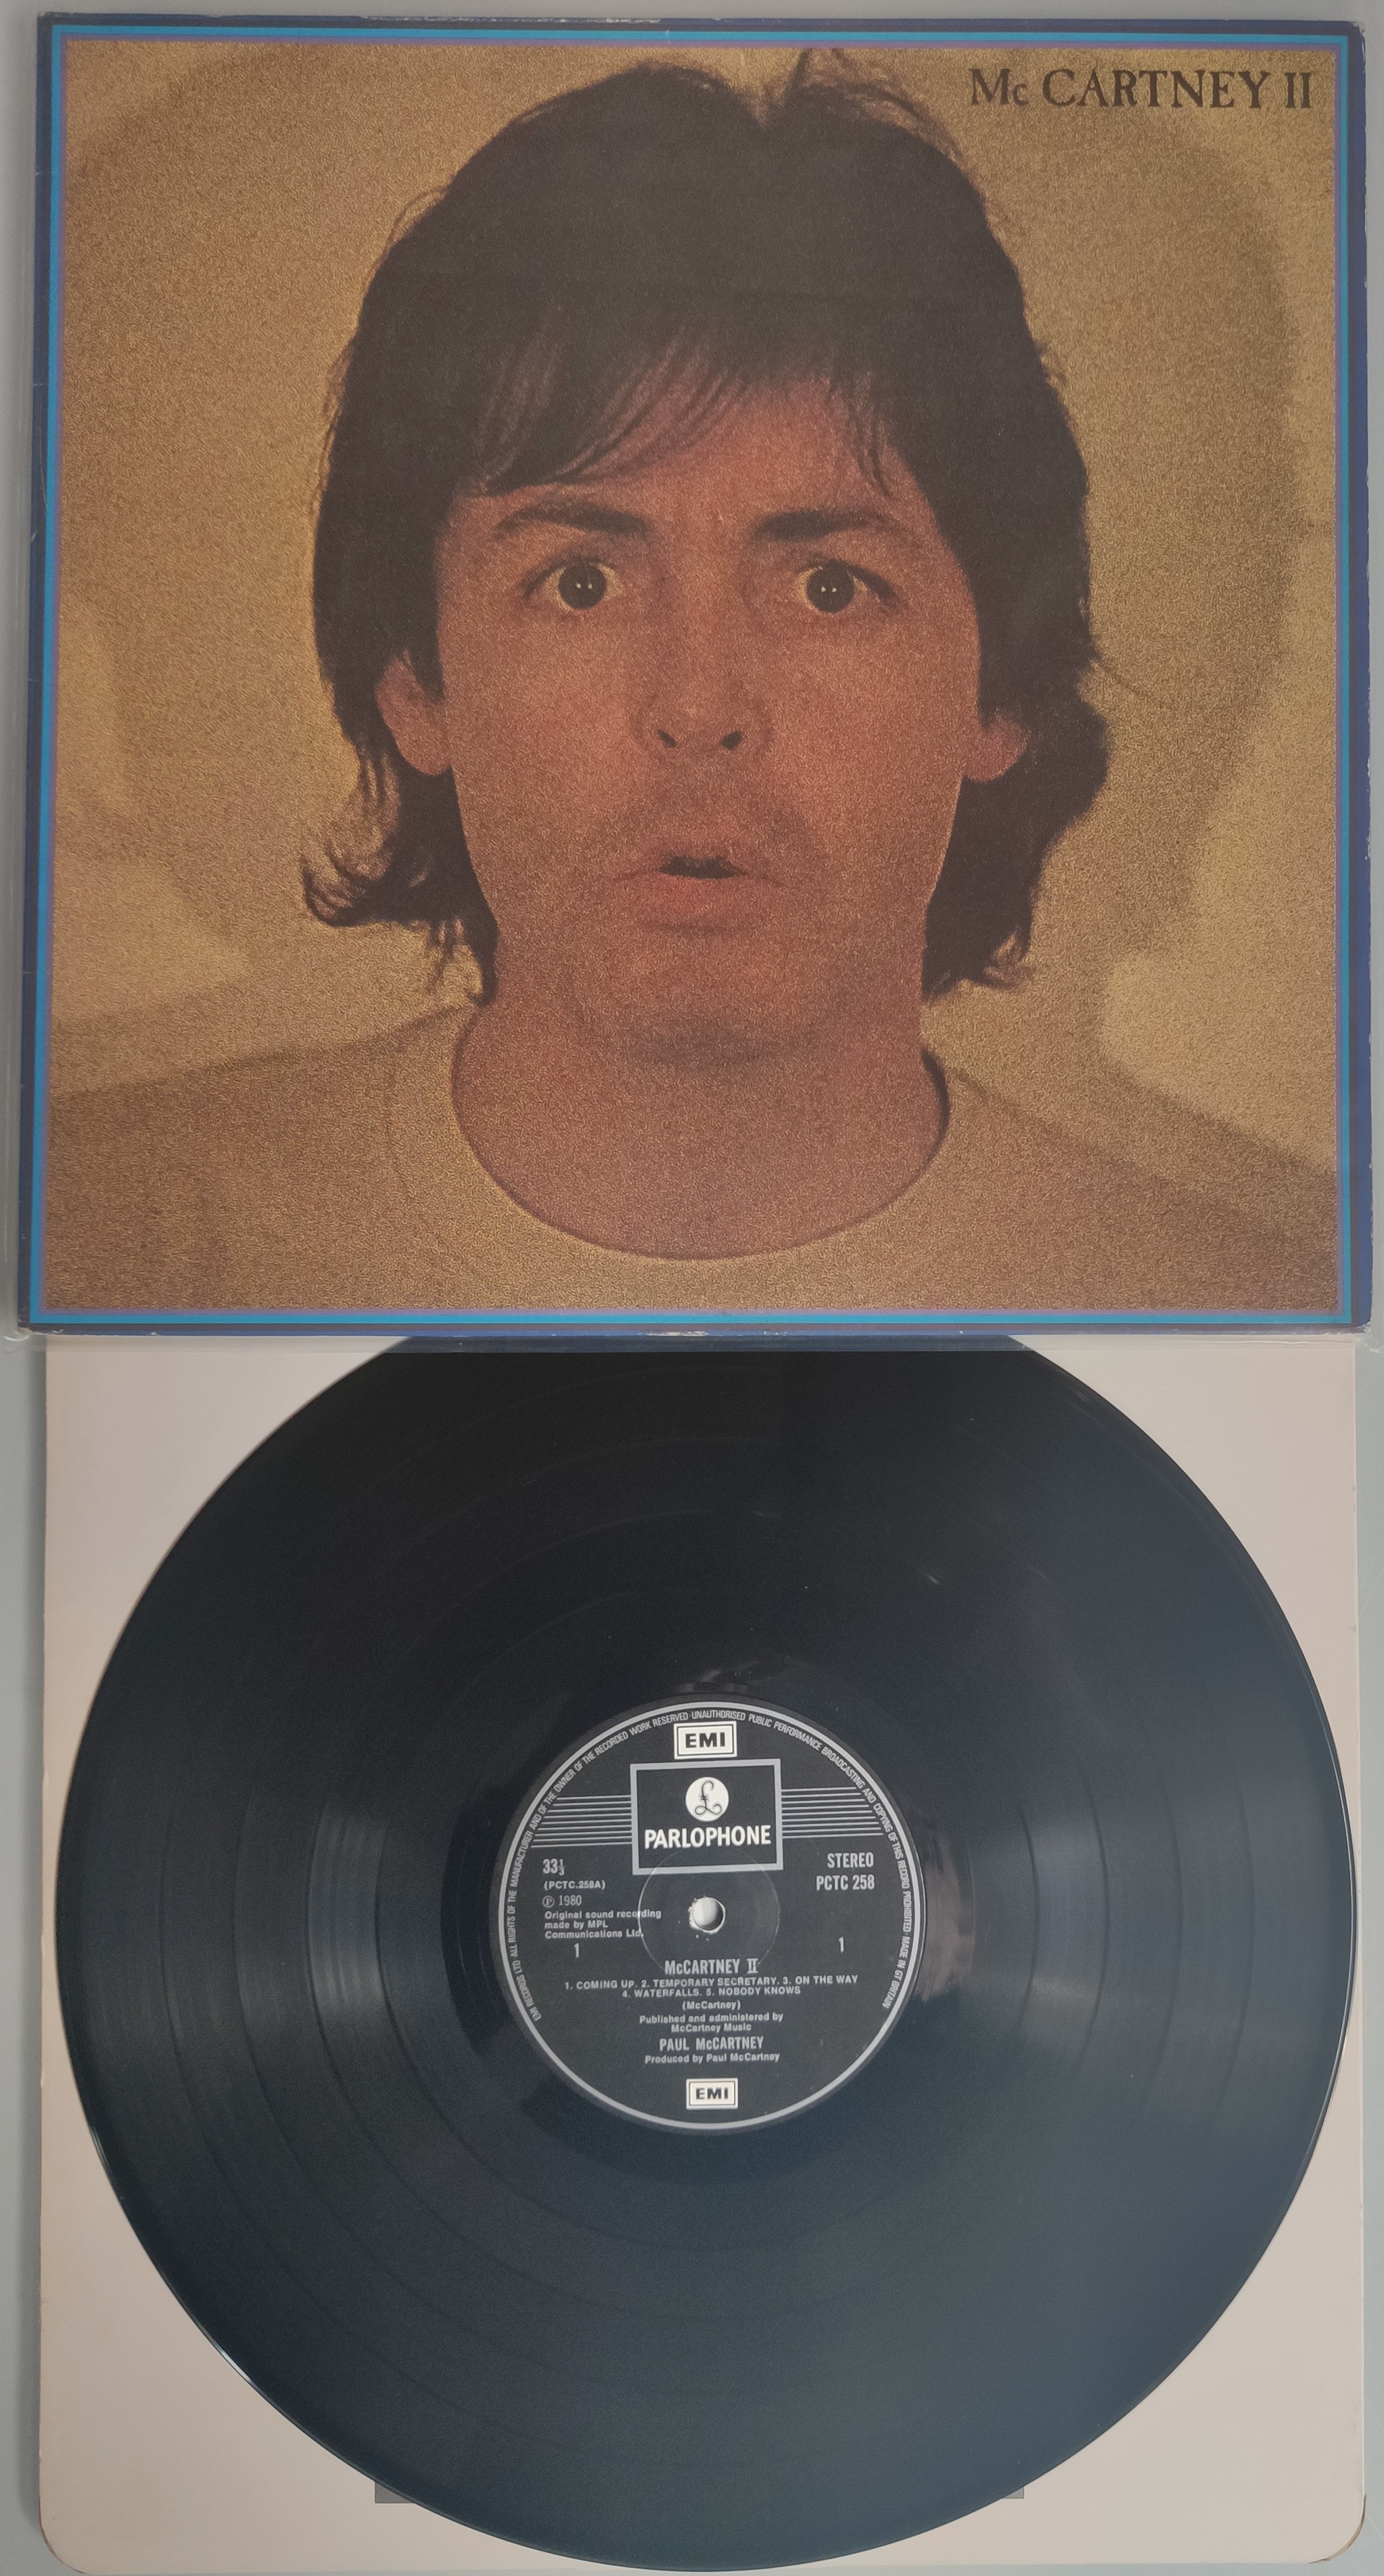 A Collection of 8 x Paul McCartney / Wings Vinyl LPs. To Include UK First Pressings and Posters - Image 11 of 15